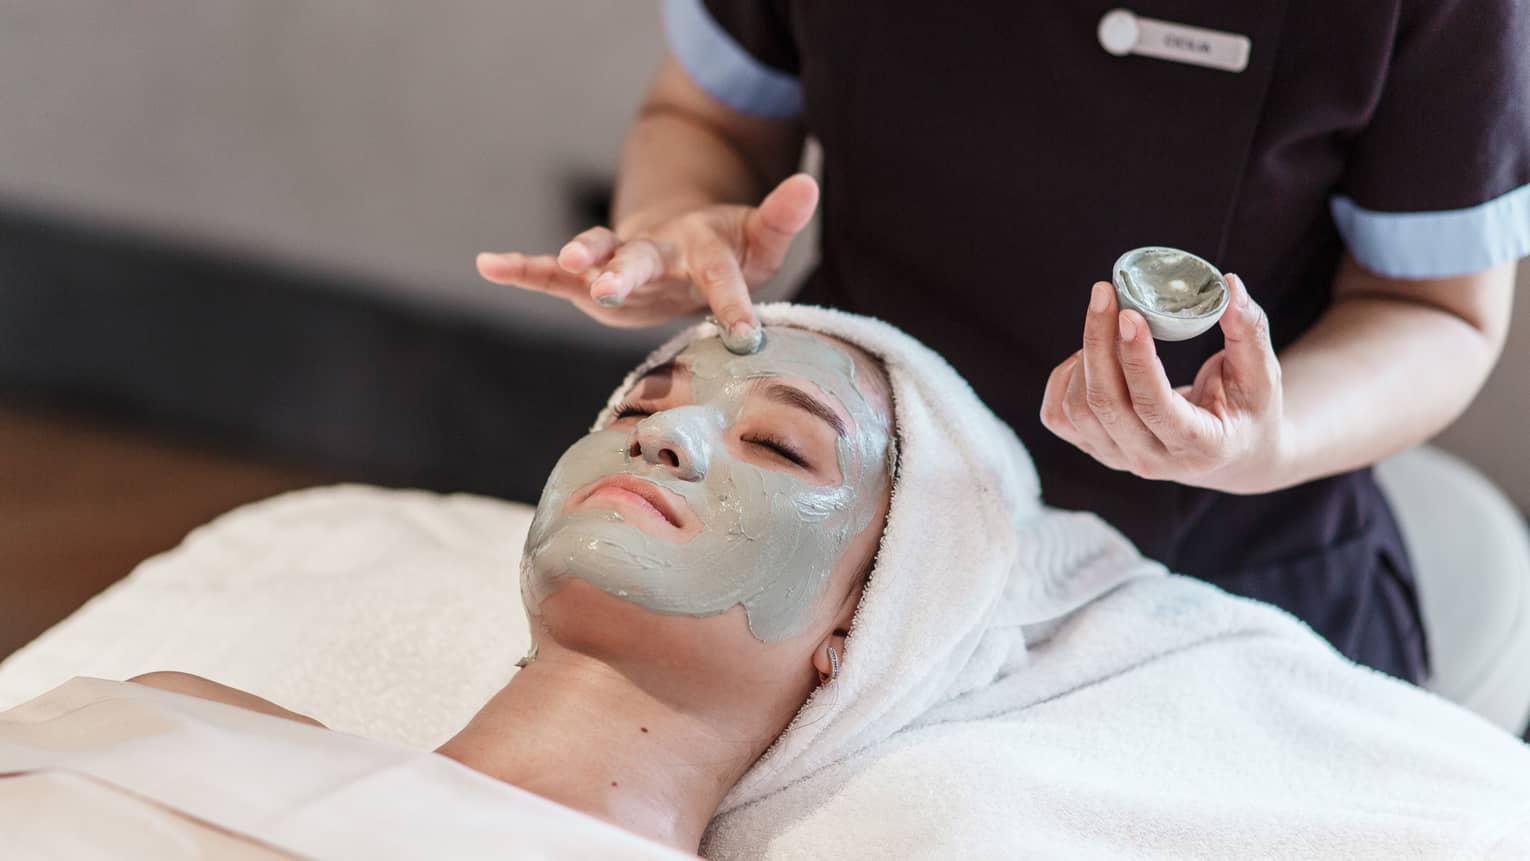 Spa staff applies green clay mask to woman's face as she lays on treatment bed 